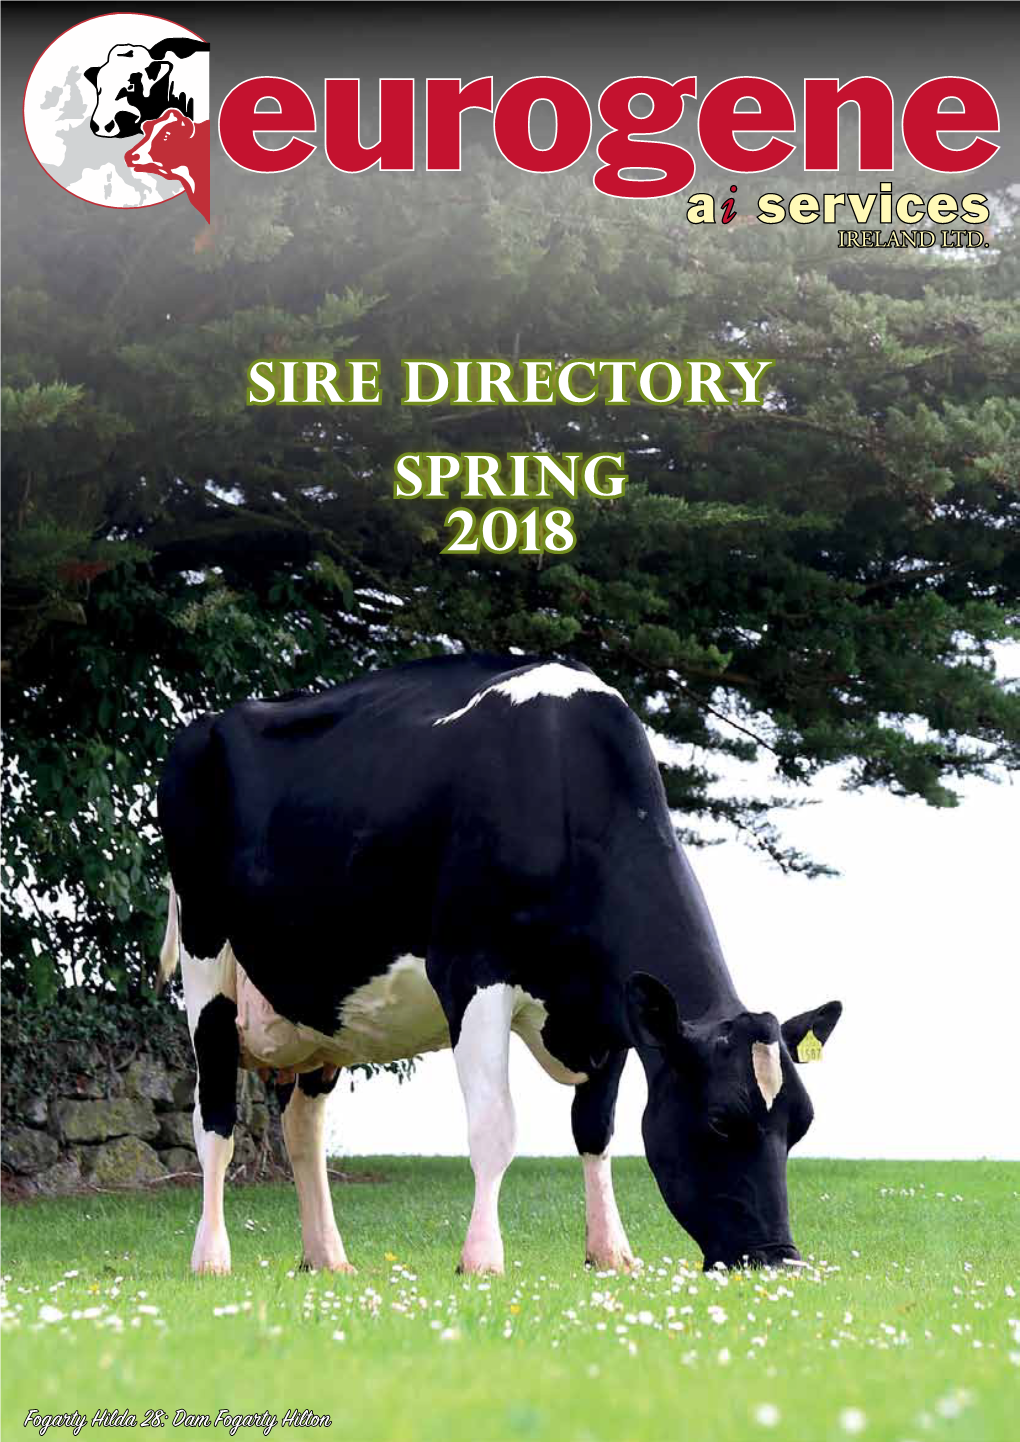 SIRE Directory SPRING 2018